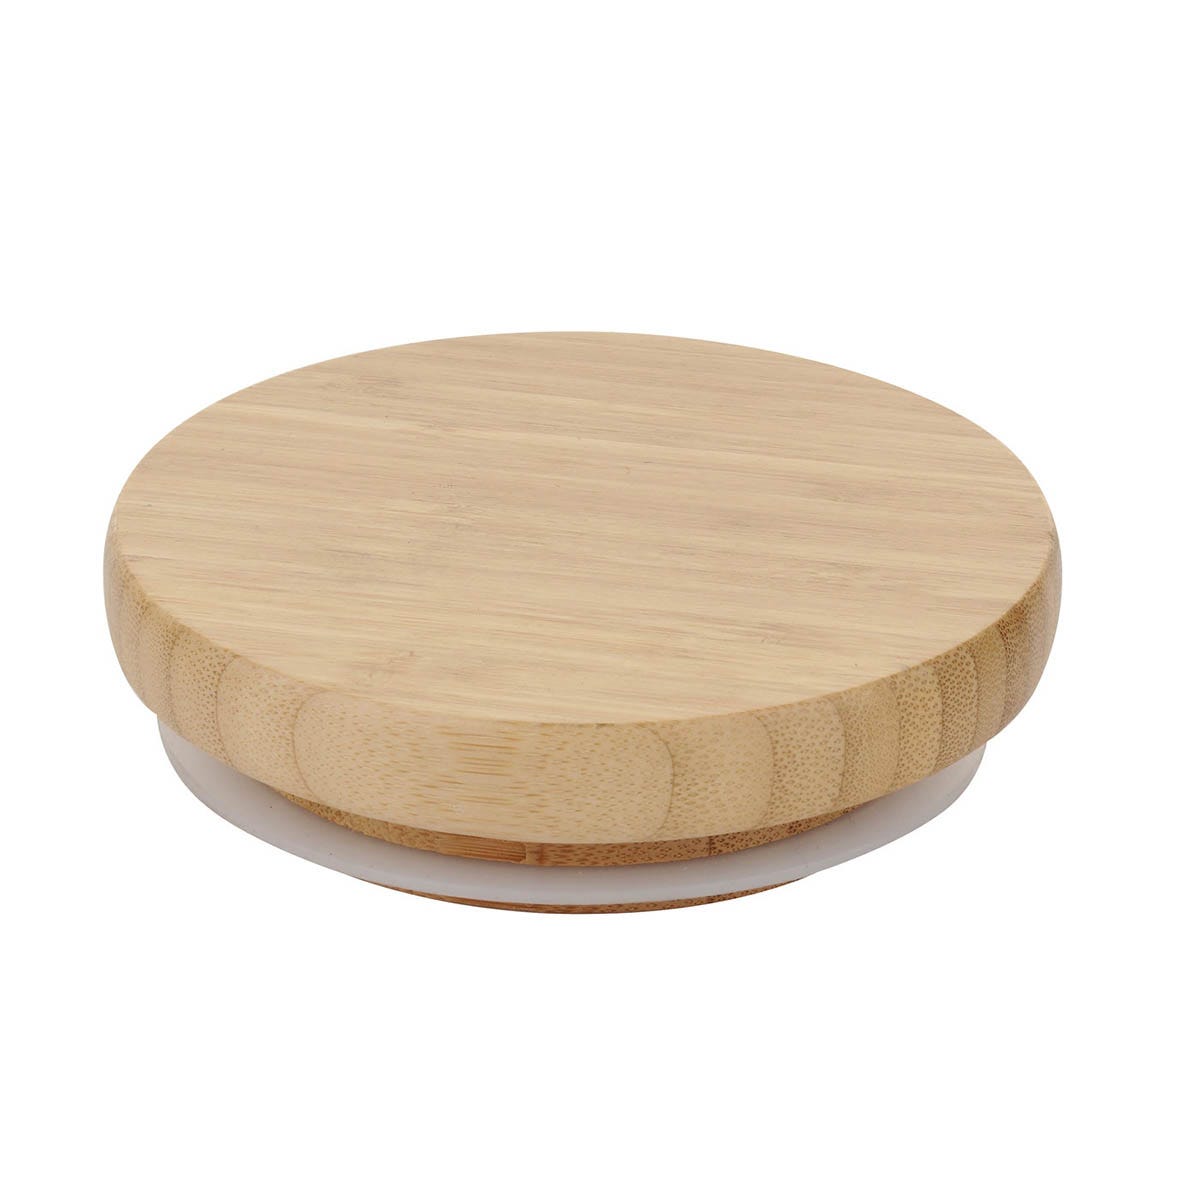 SPARE PART 3.75 Inch Wooden LID ONLY